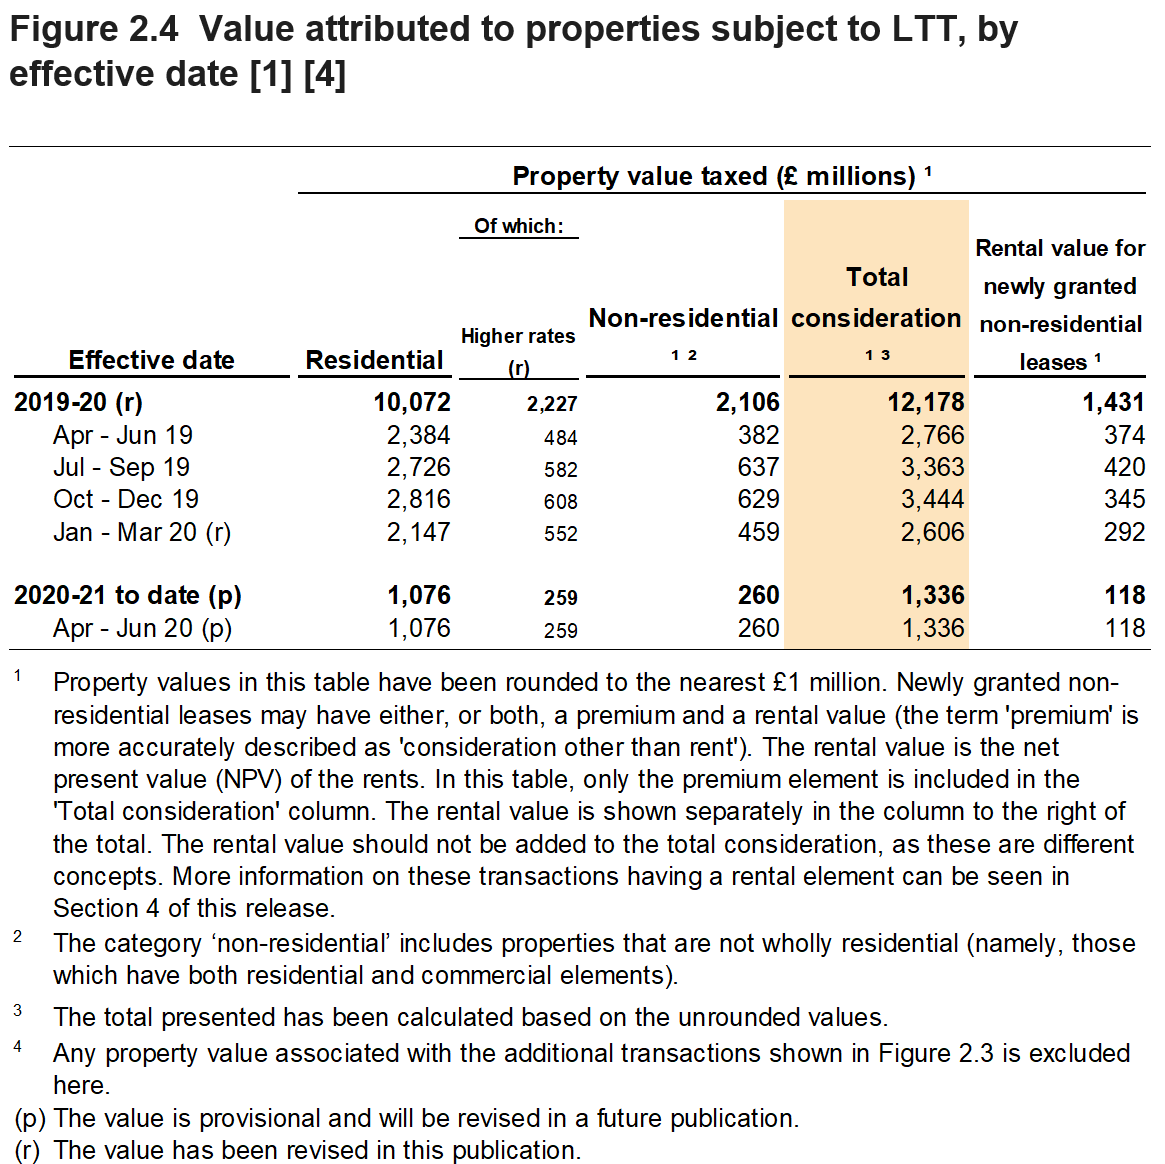 Figure 2.4 shows the value of properties subject to LTT, by the quarter and year in which the transactions were effective. Figure 2.4 also shows a breakdown for residential and non-residential transactions, and separate figures for the rental value of newly granted non-residential leases.